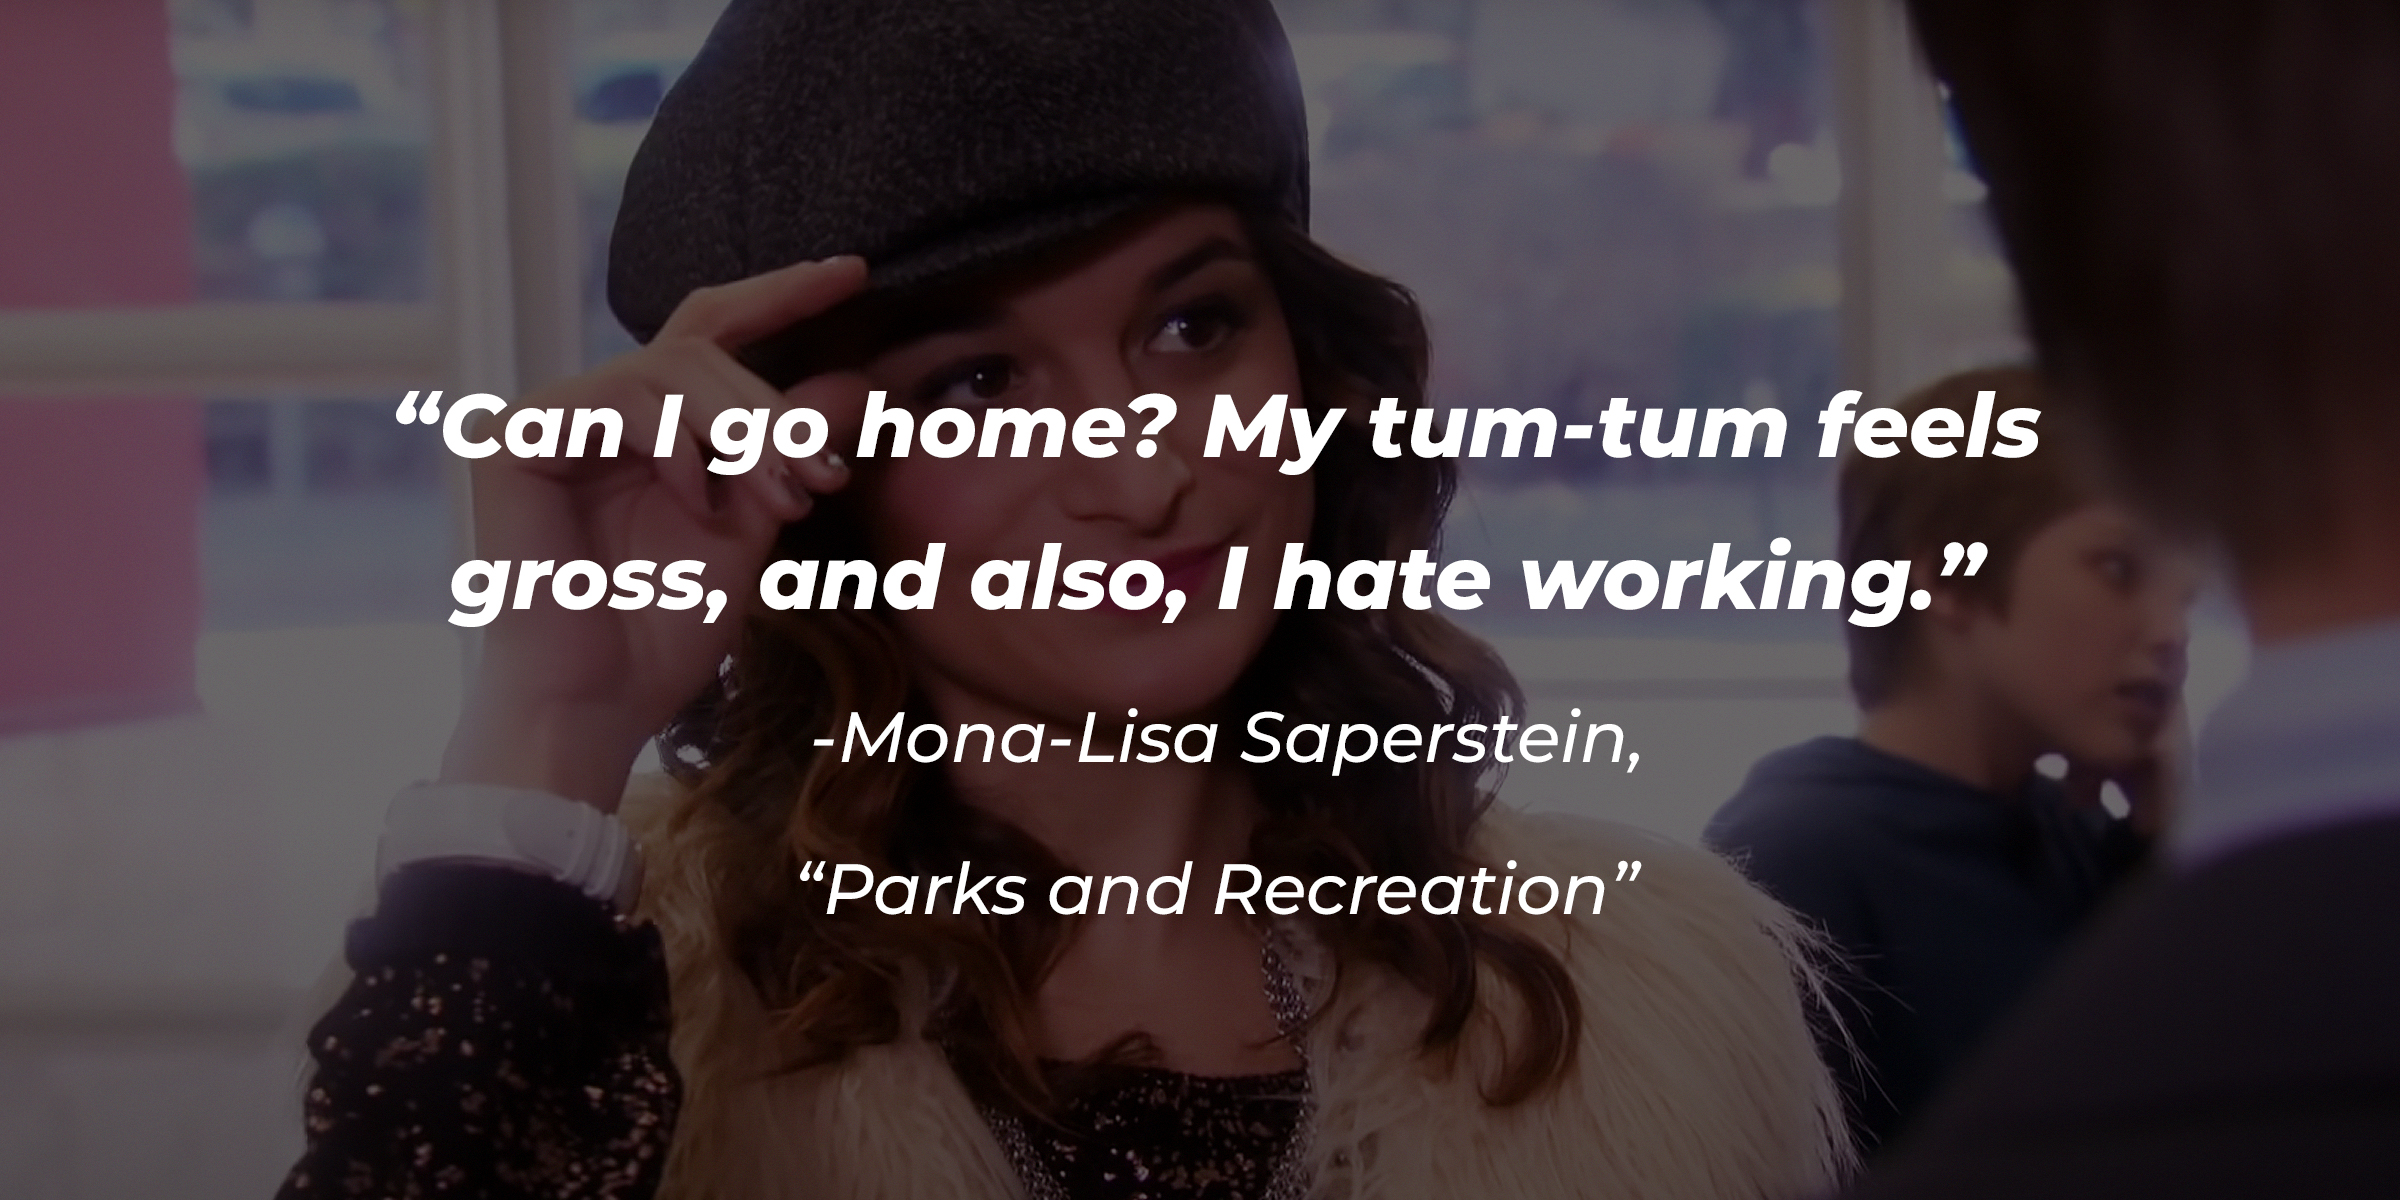 Mona-Lisa Saperstein with her quote on "Parks and Recreation:" "Can I go home? My tum-tum feels gross, and also, I hate working." | Source: Youtube.com/ParksandRecreation